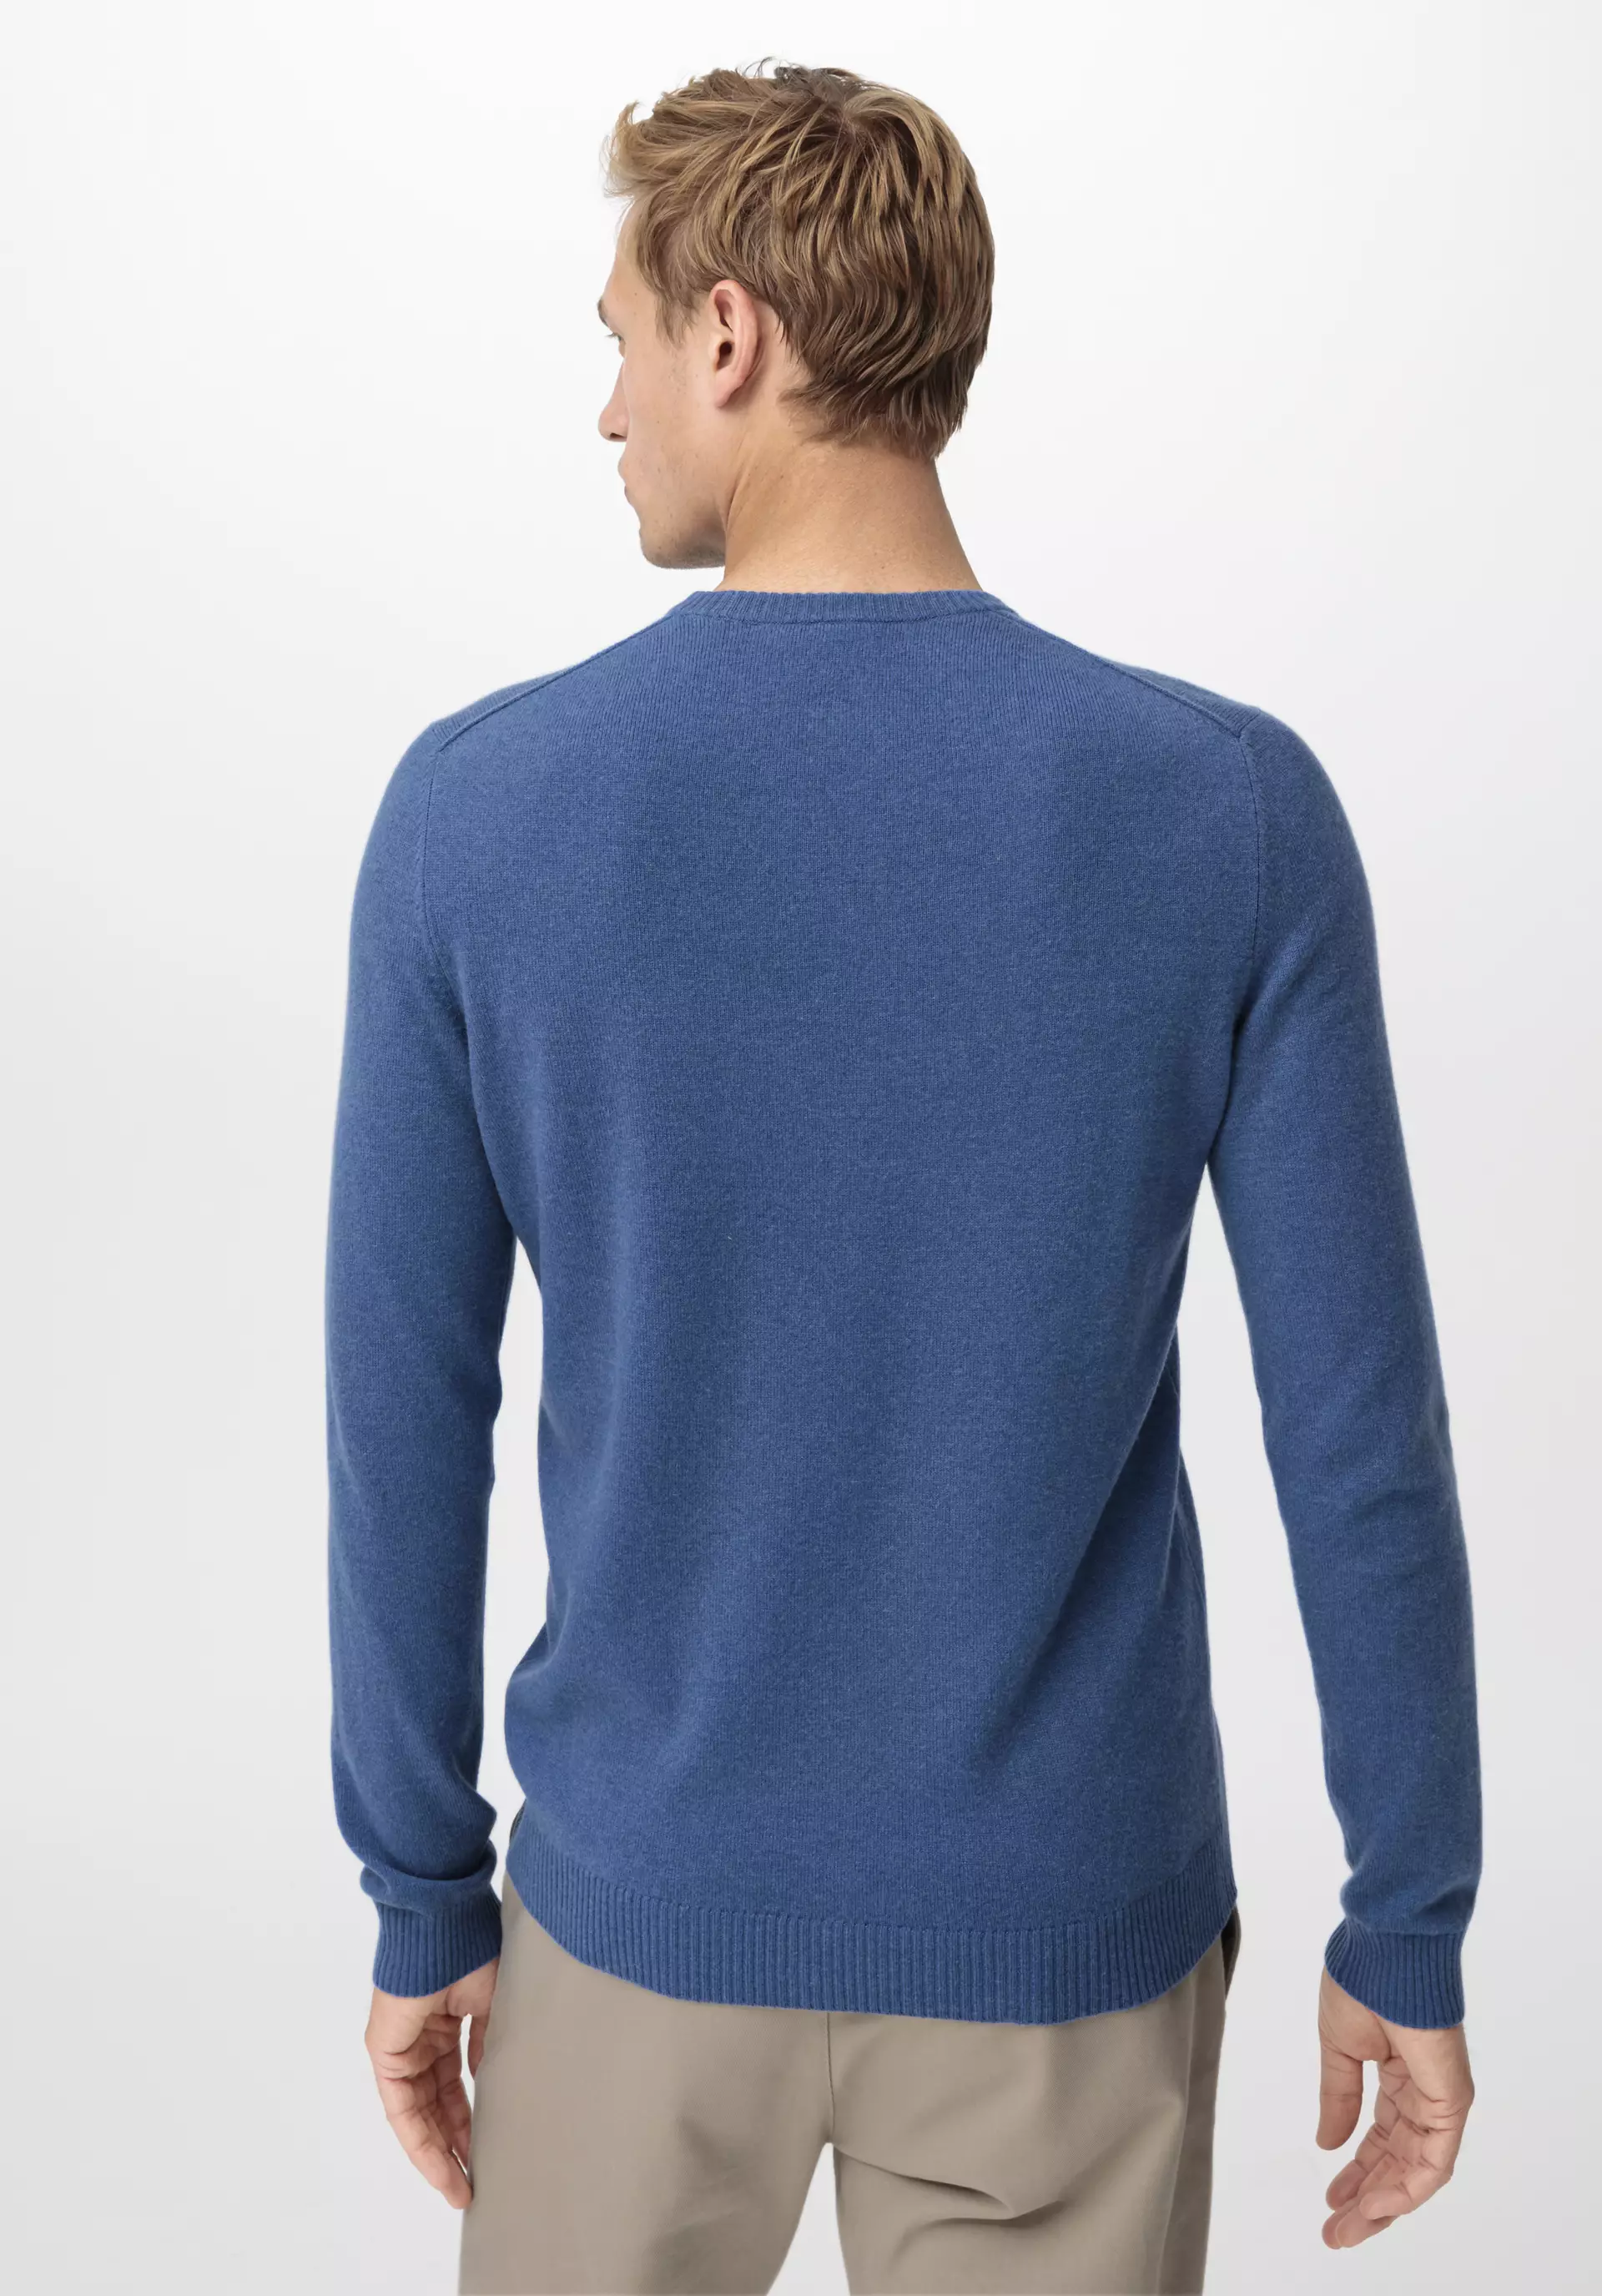 cashmere Virgin sweater wool 45822 with